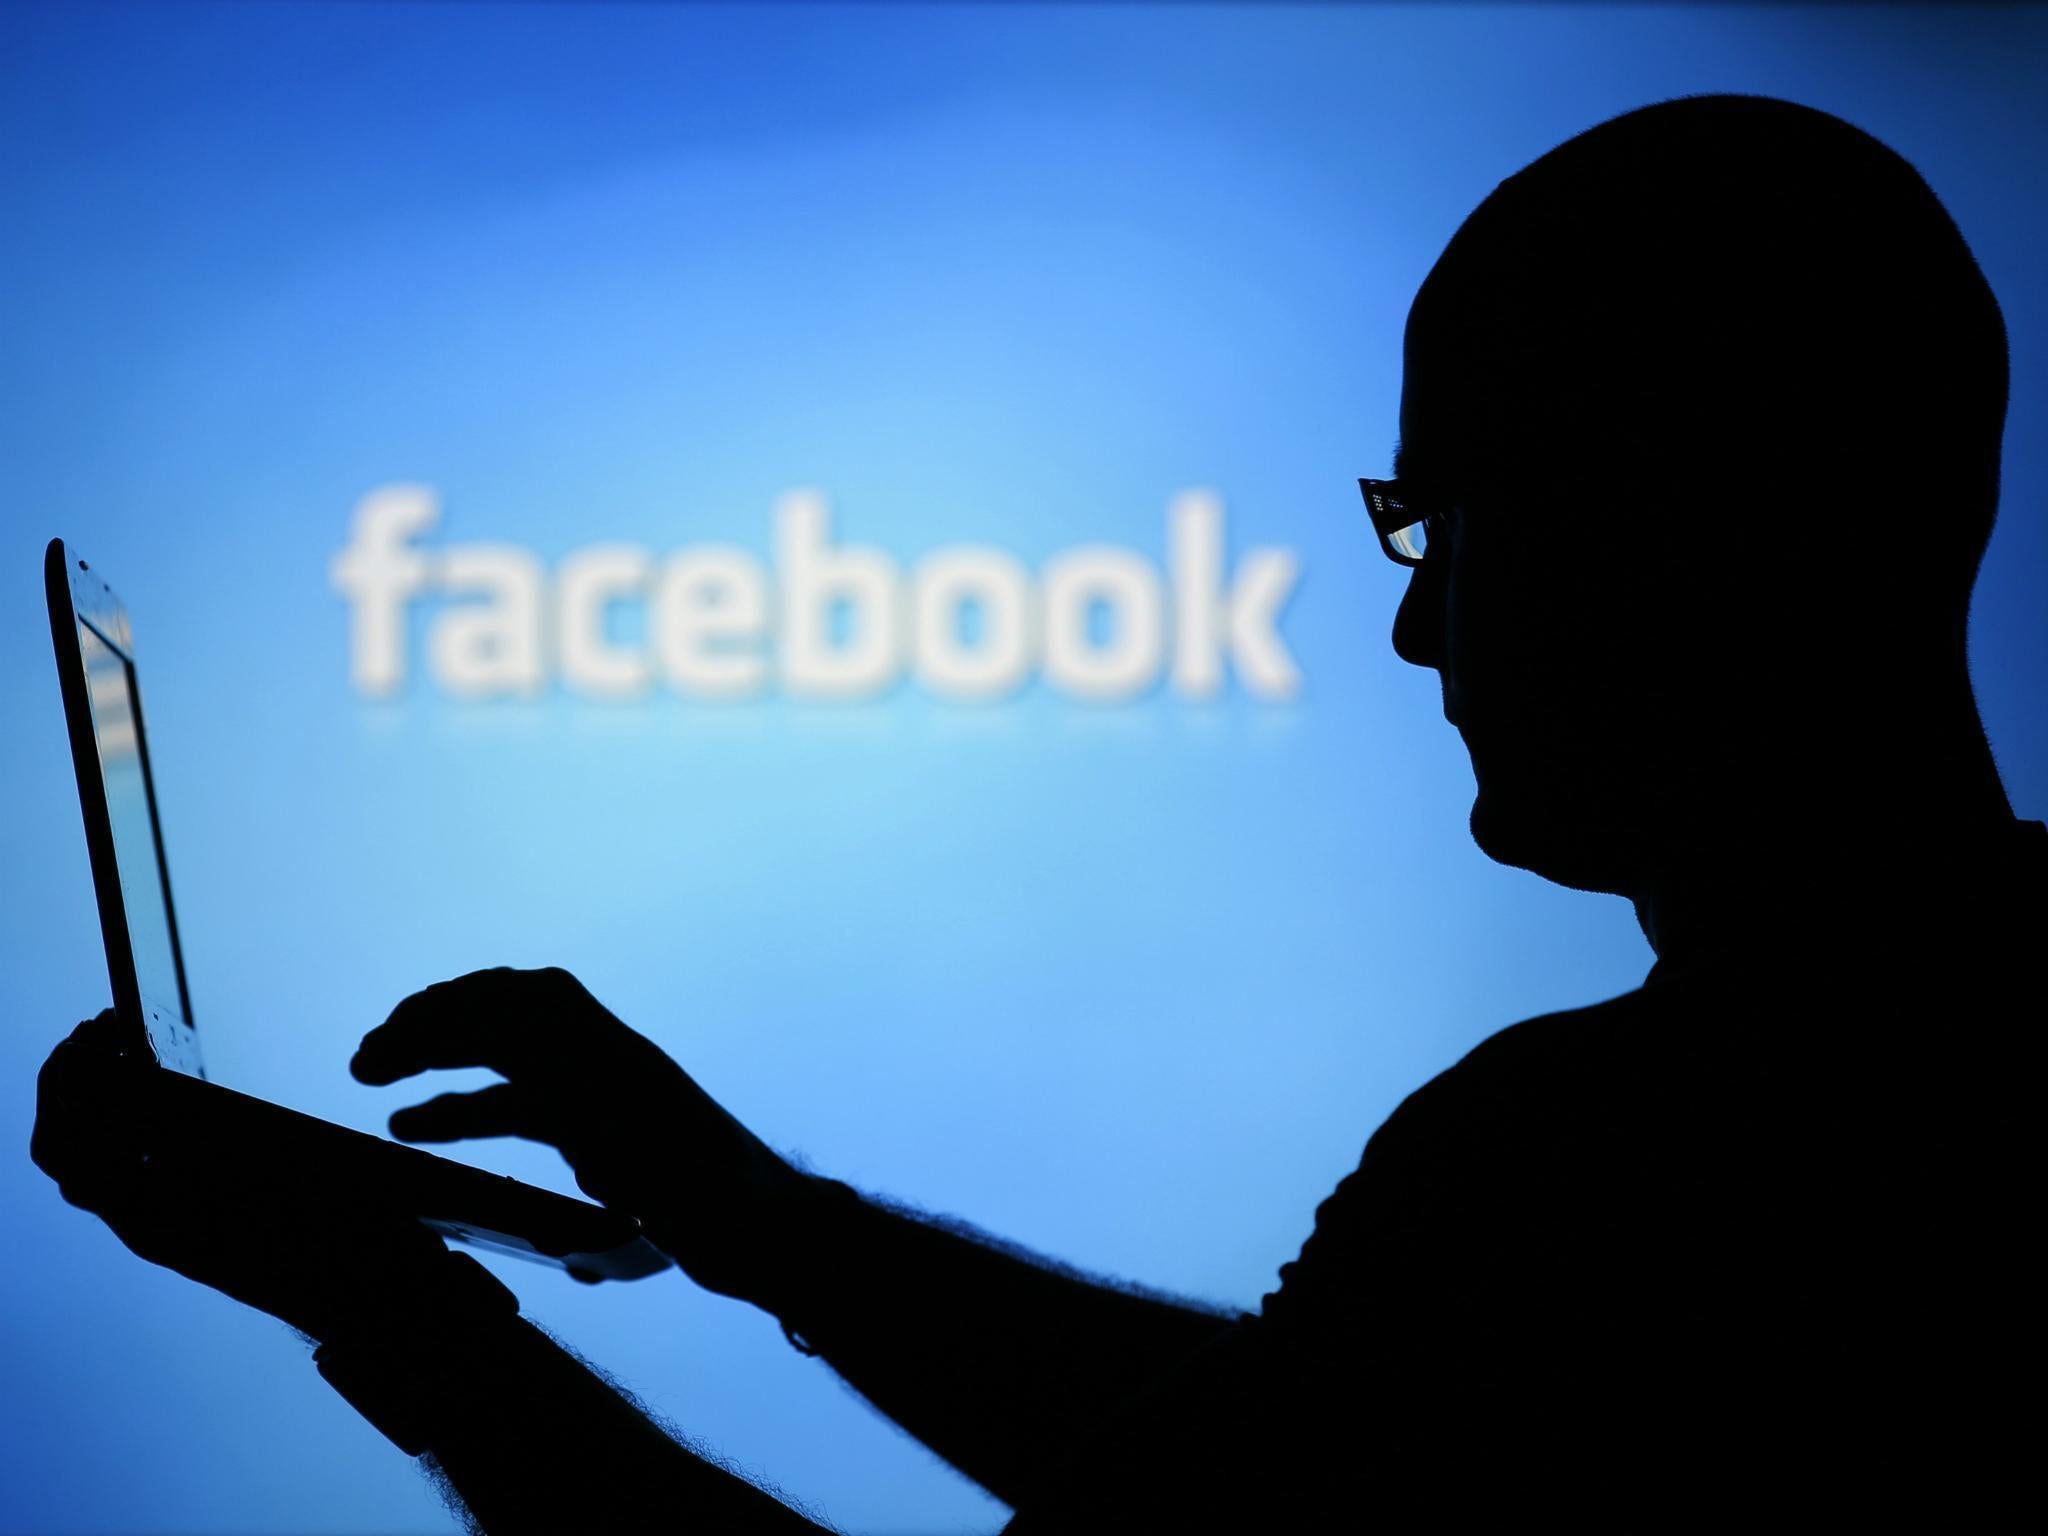 Facebook is not named as a defendant but is accused in the lawsuit of engaging in the practice